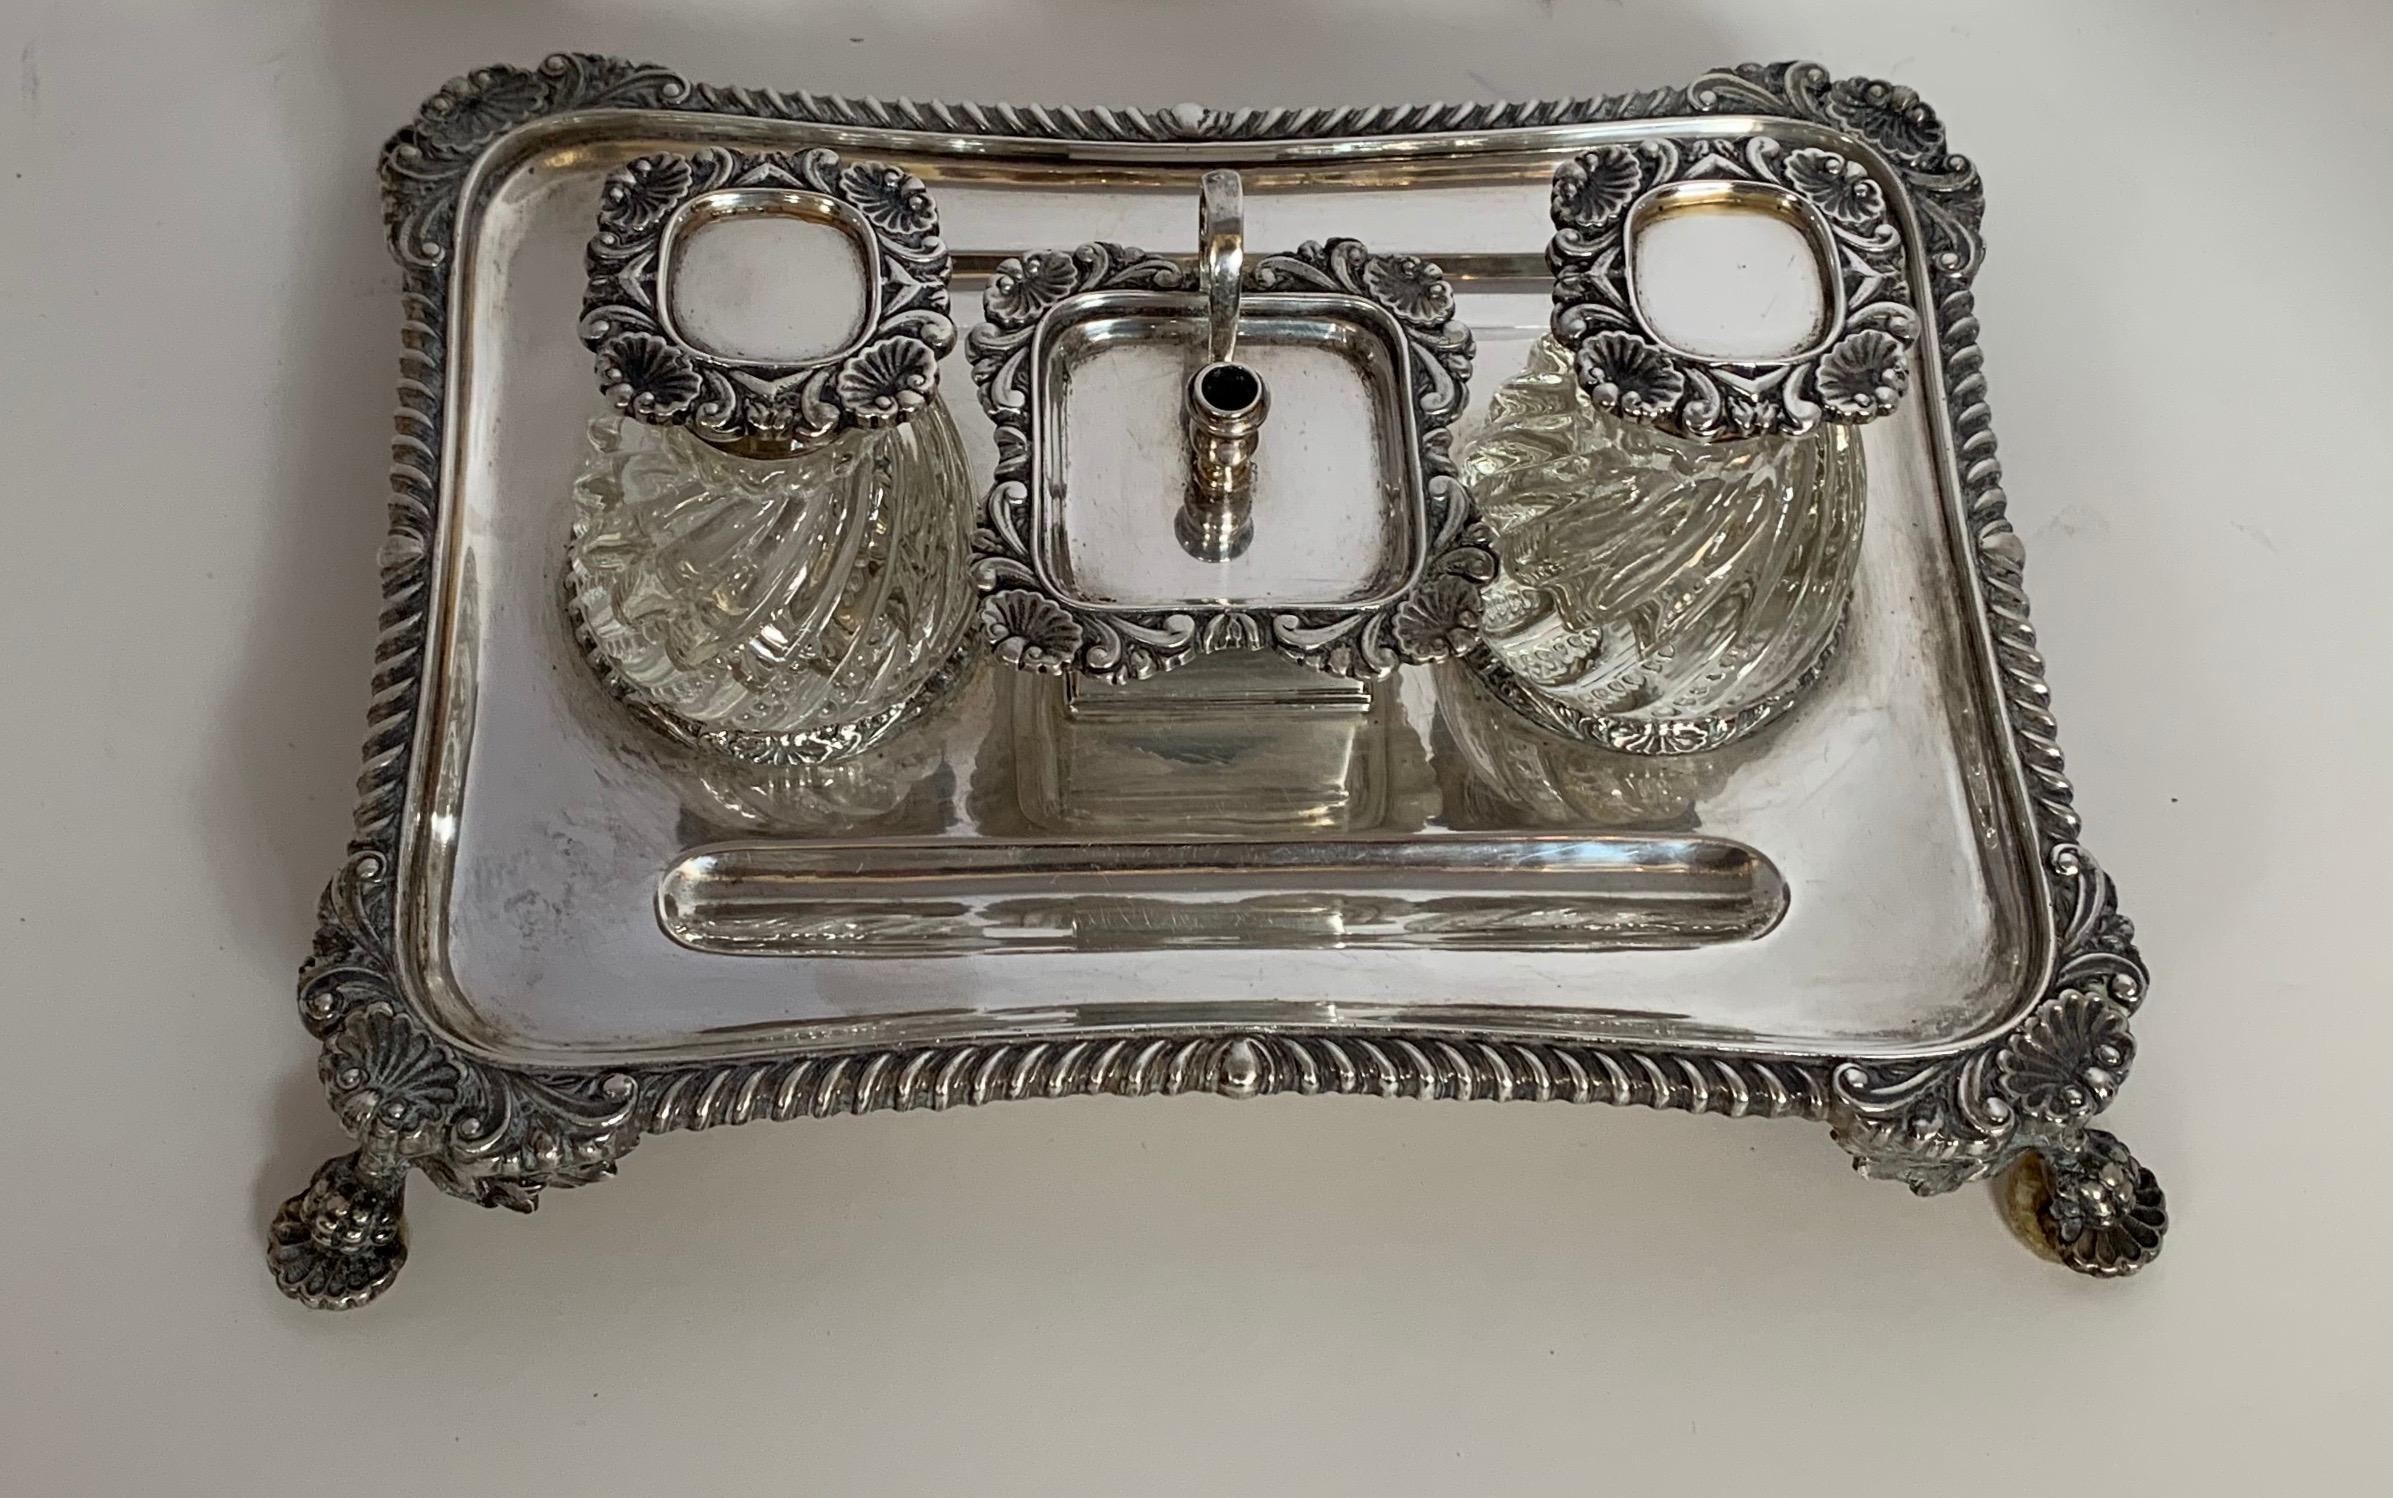 A wonderful English sterling silver and crystal partner desk inkwell set, marked 